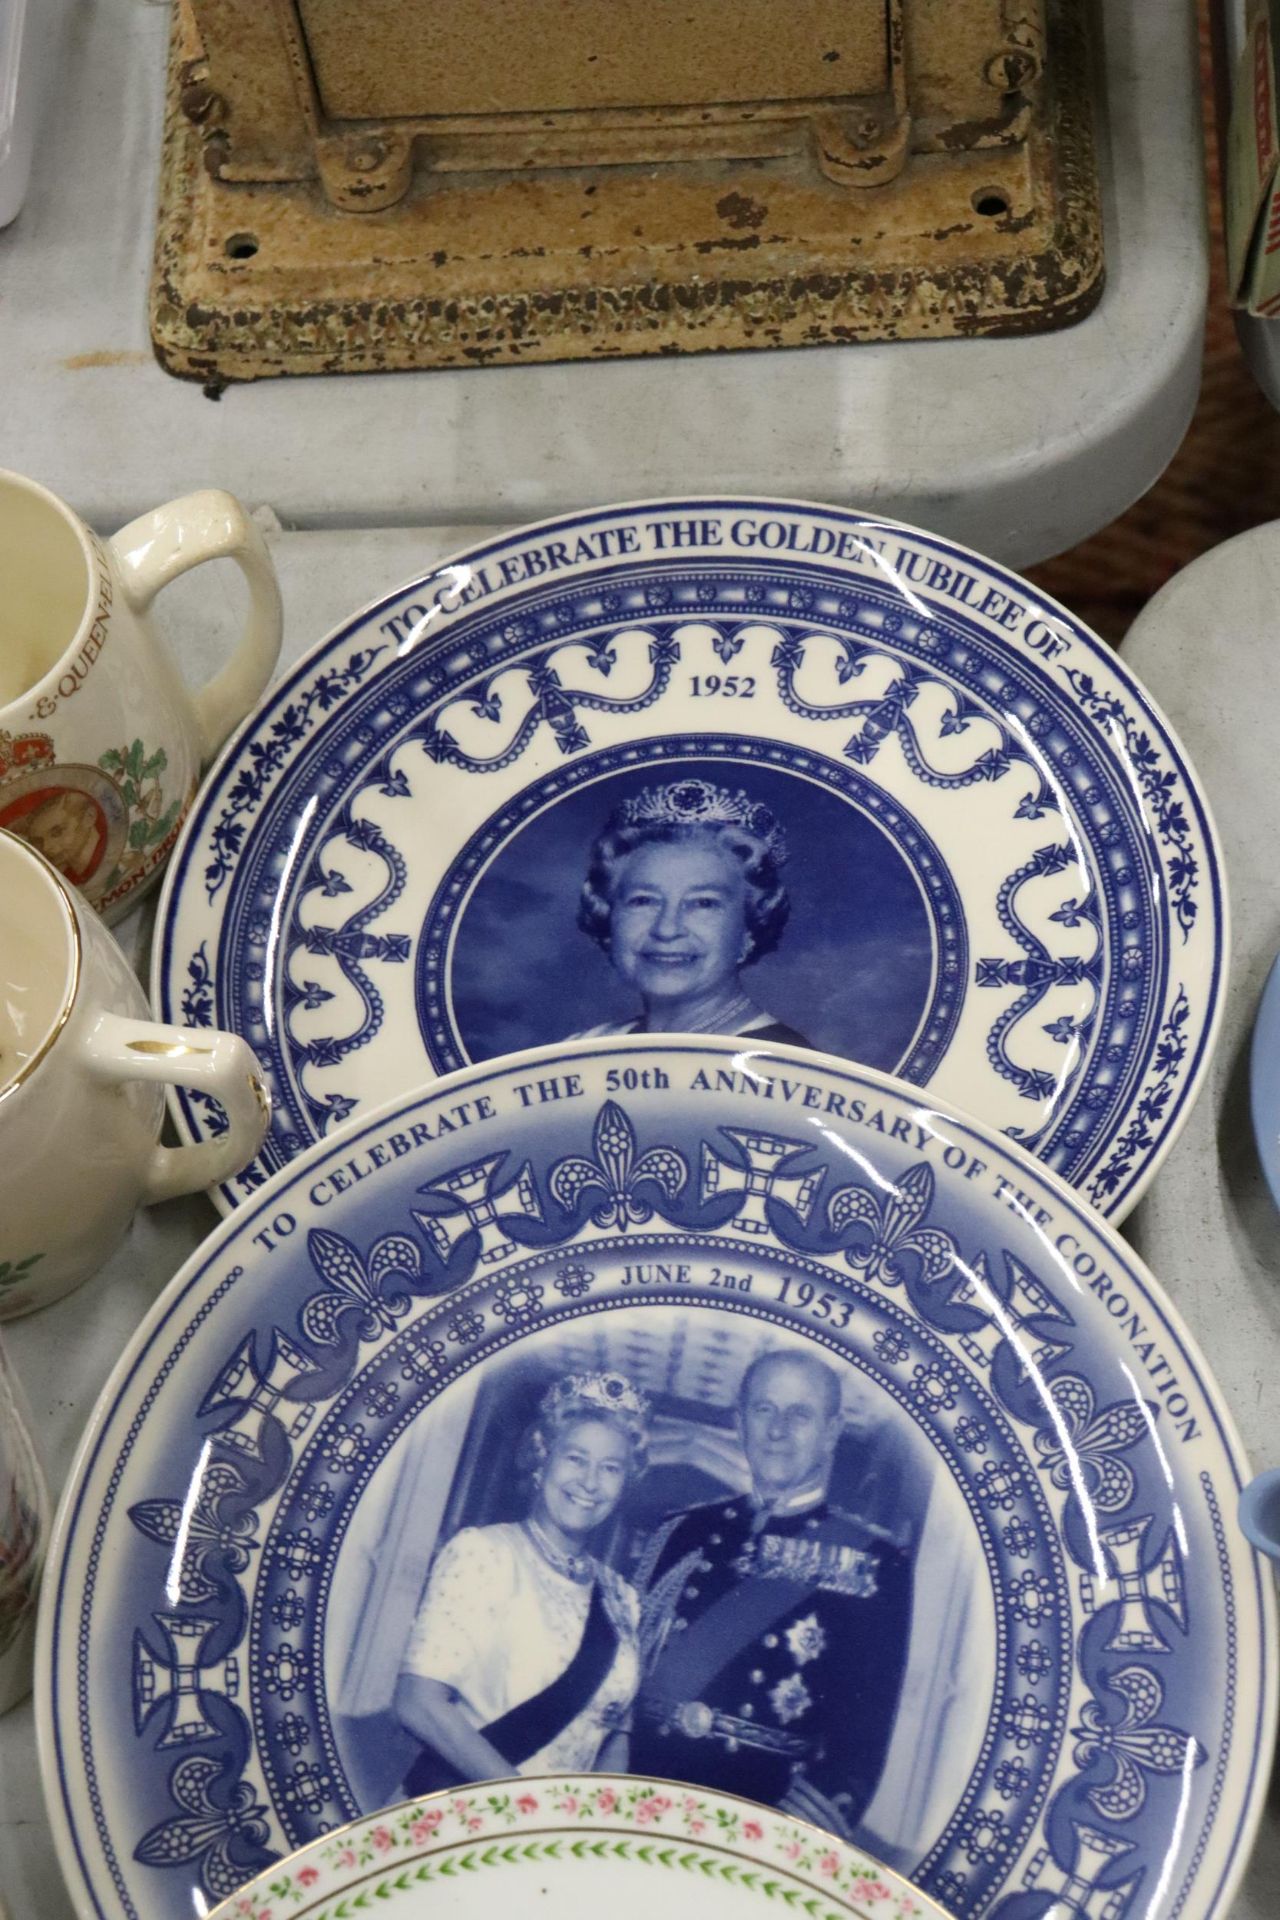 A COLLECTION OF ROYAL COMMEMORATIVE ITEMS TO INCLUDE CUPS, PLATES, PLUS GUINNESS CERAMICS - Image 2 of 11